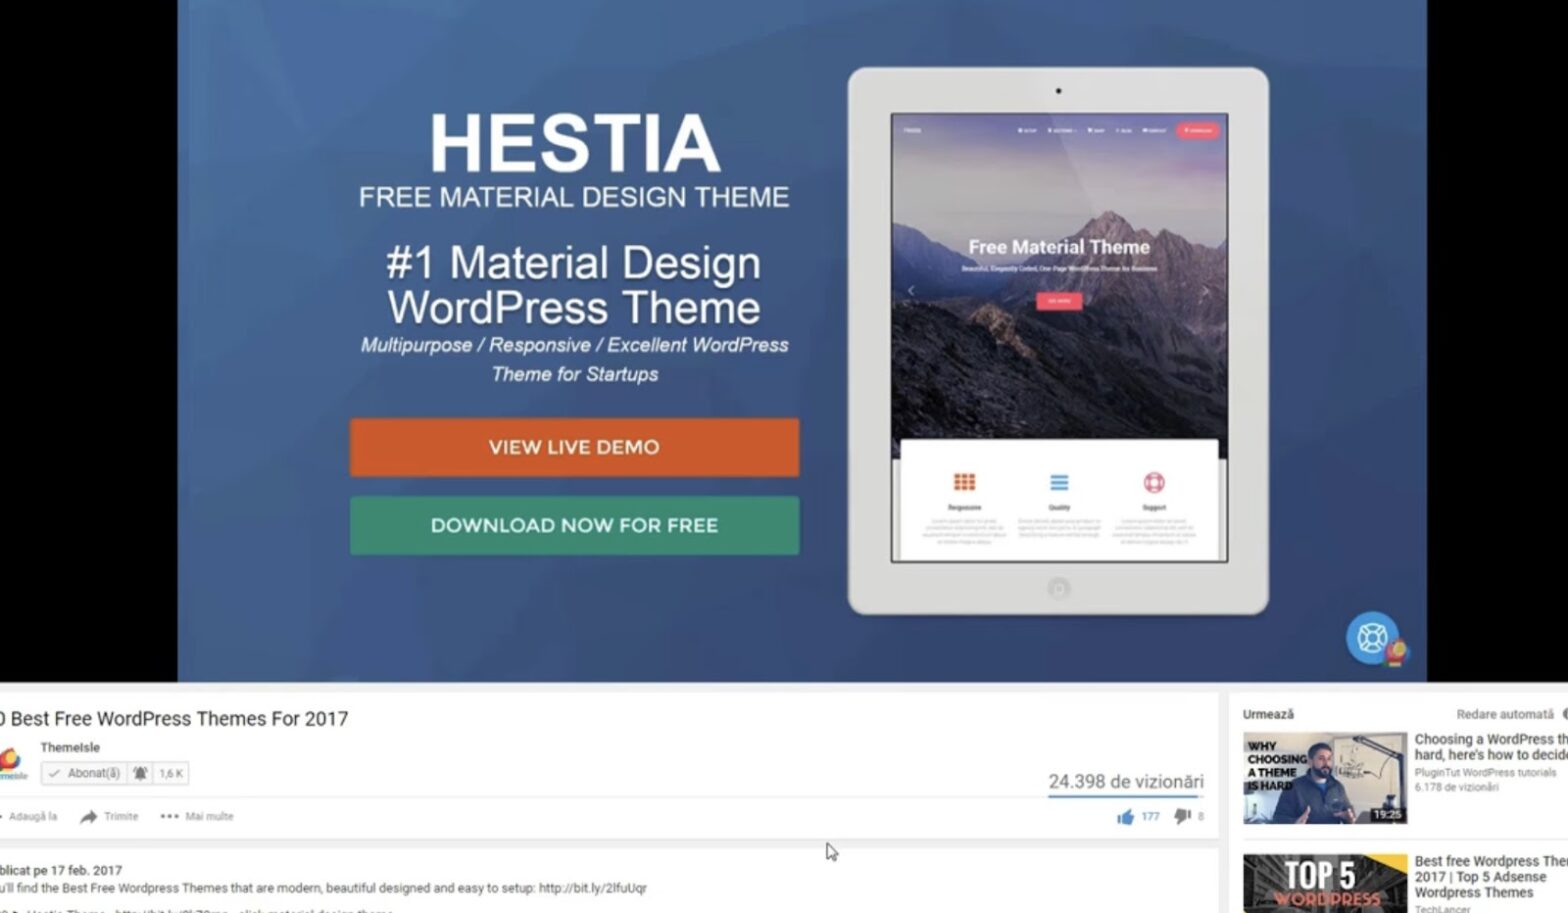 Advert for Hestia, a free material design WordPress theme, displayed on a tablet screen, with 'View Live Demo' and 'Download Now for Free' buttons, against a dark blue background